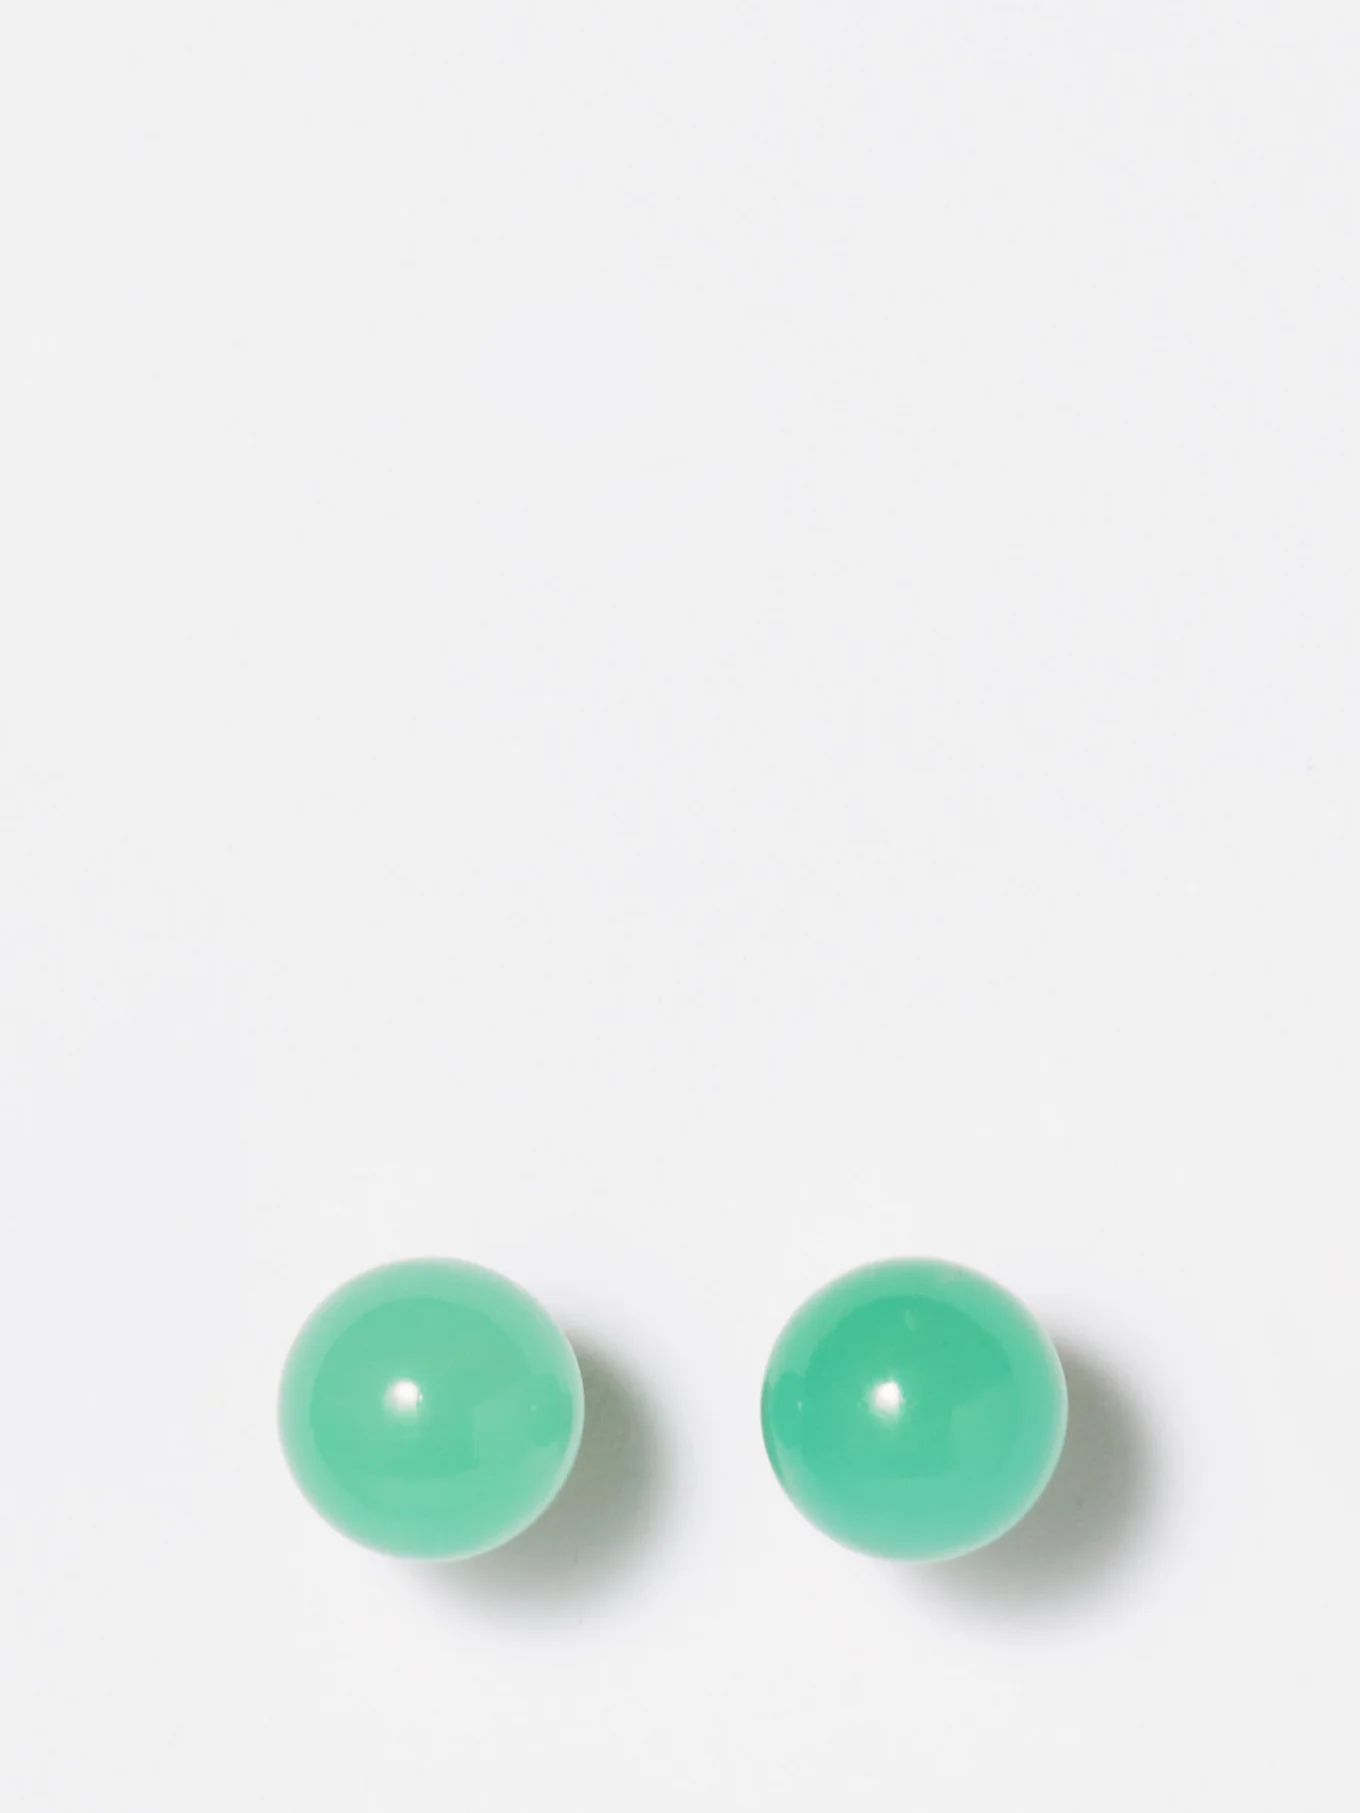 Gumball chrysoprase & 18kt gold stud earrings | Irene Neuwirth | Matches (US)